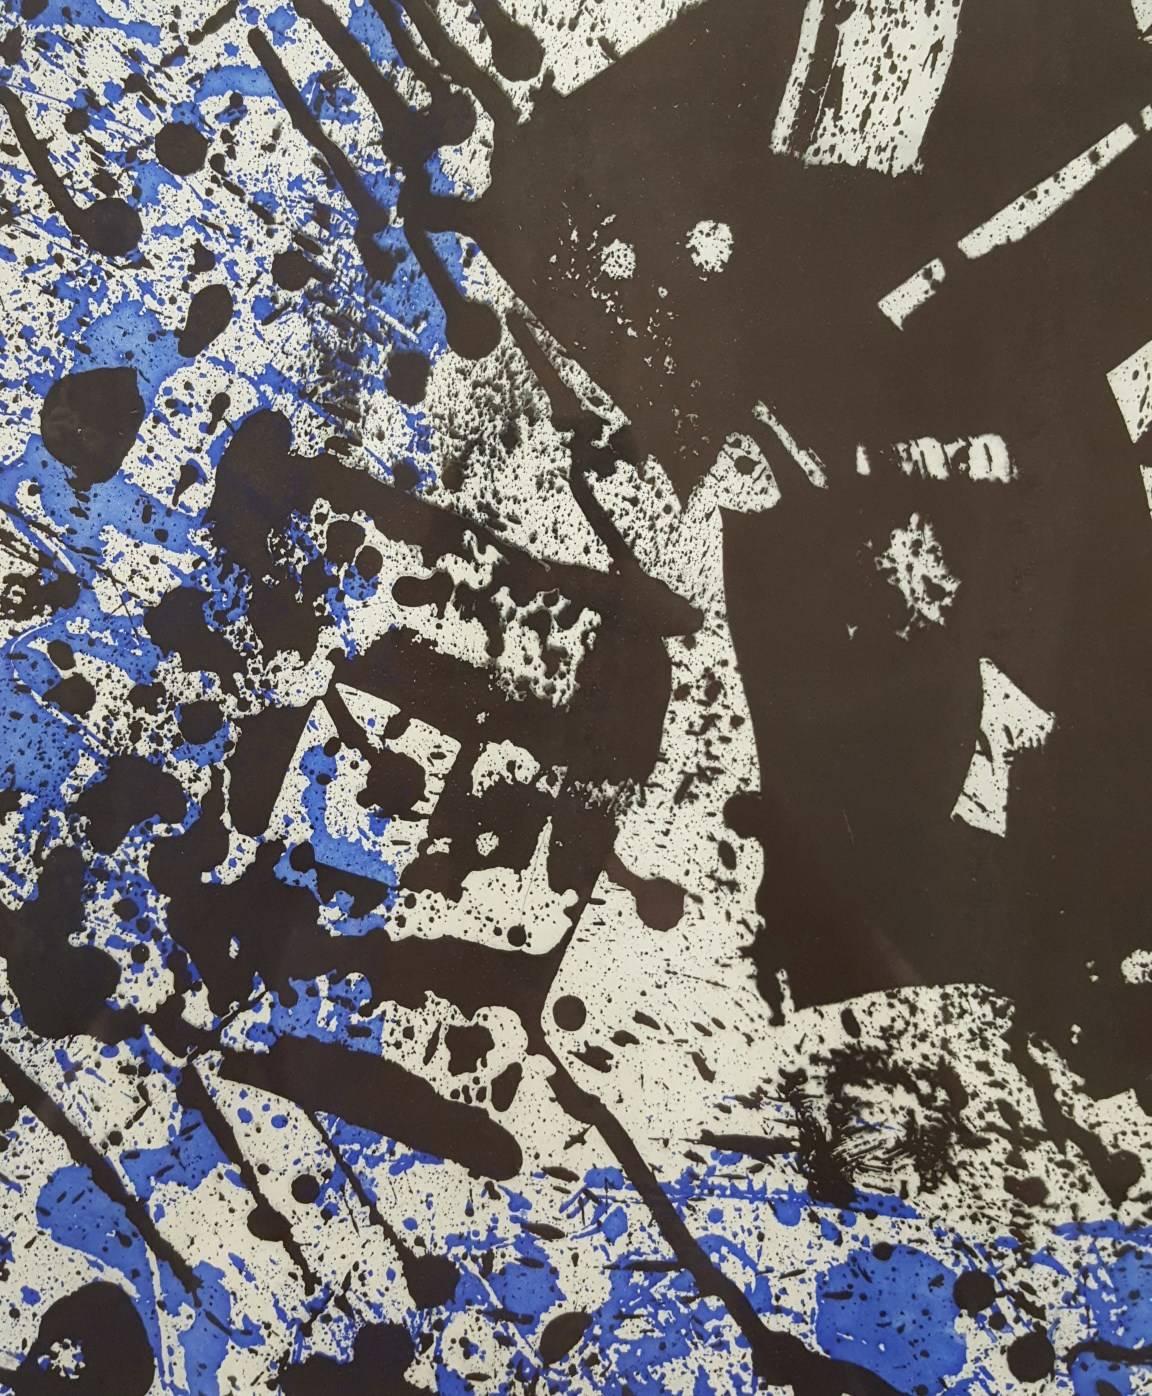 An original signed etching and sugar lift aquatint on Somerset paper by American artist Sam Francis (1923-1994) titled 